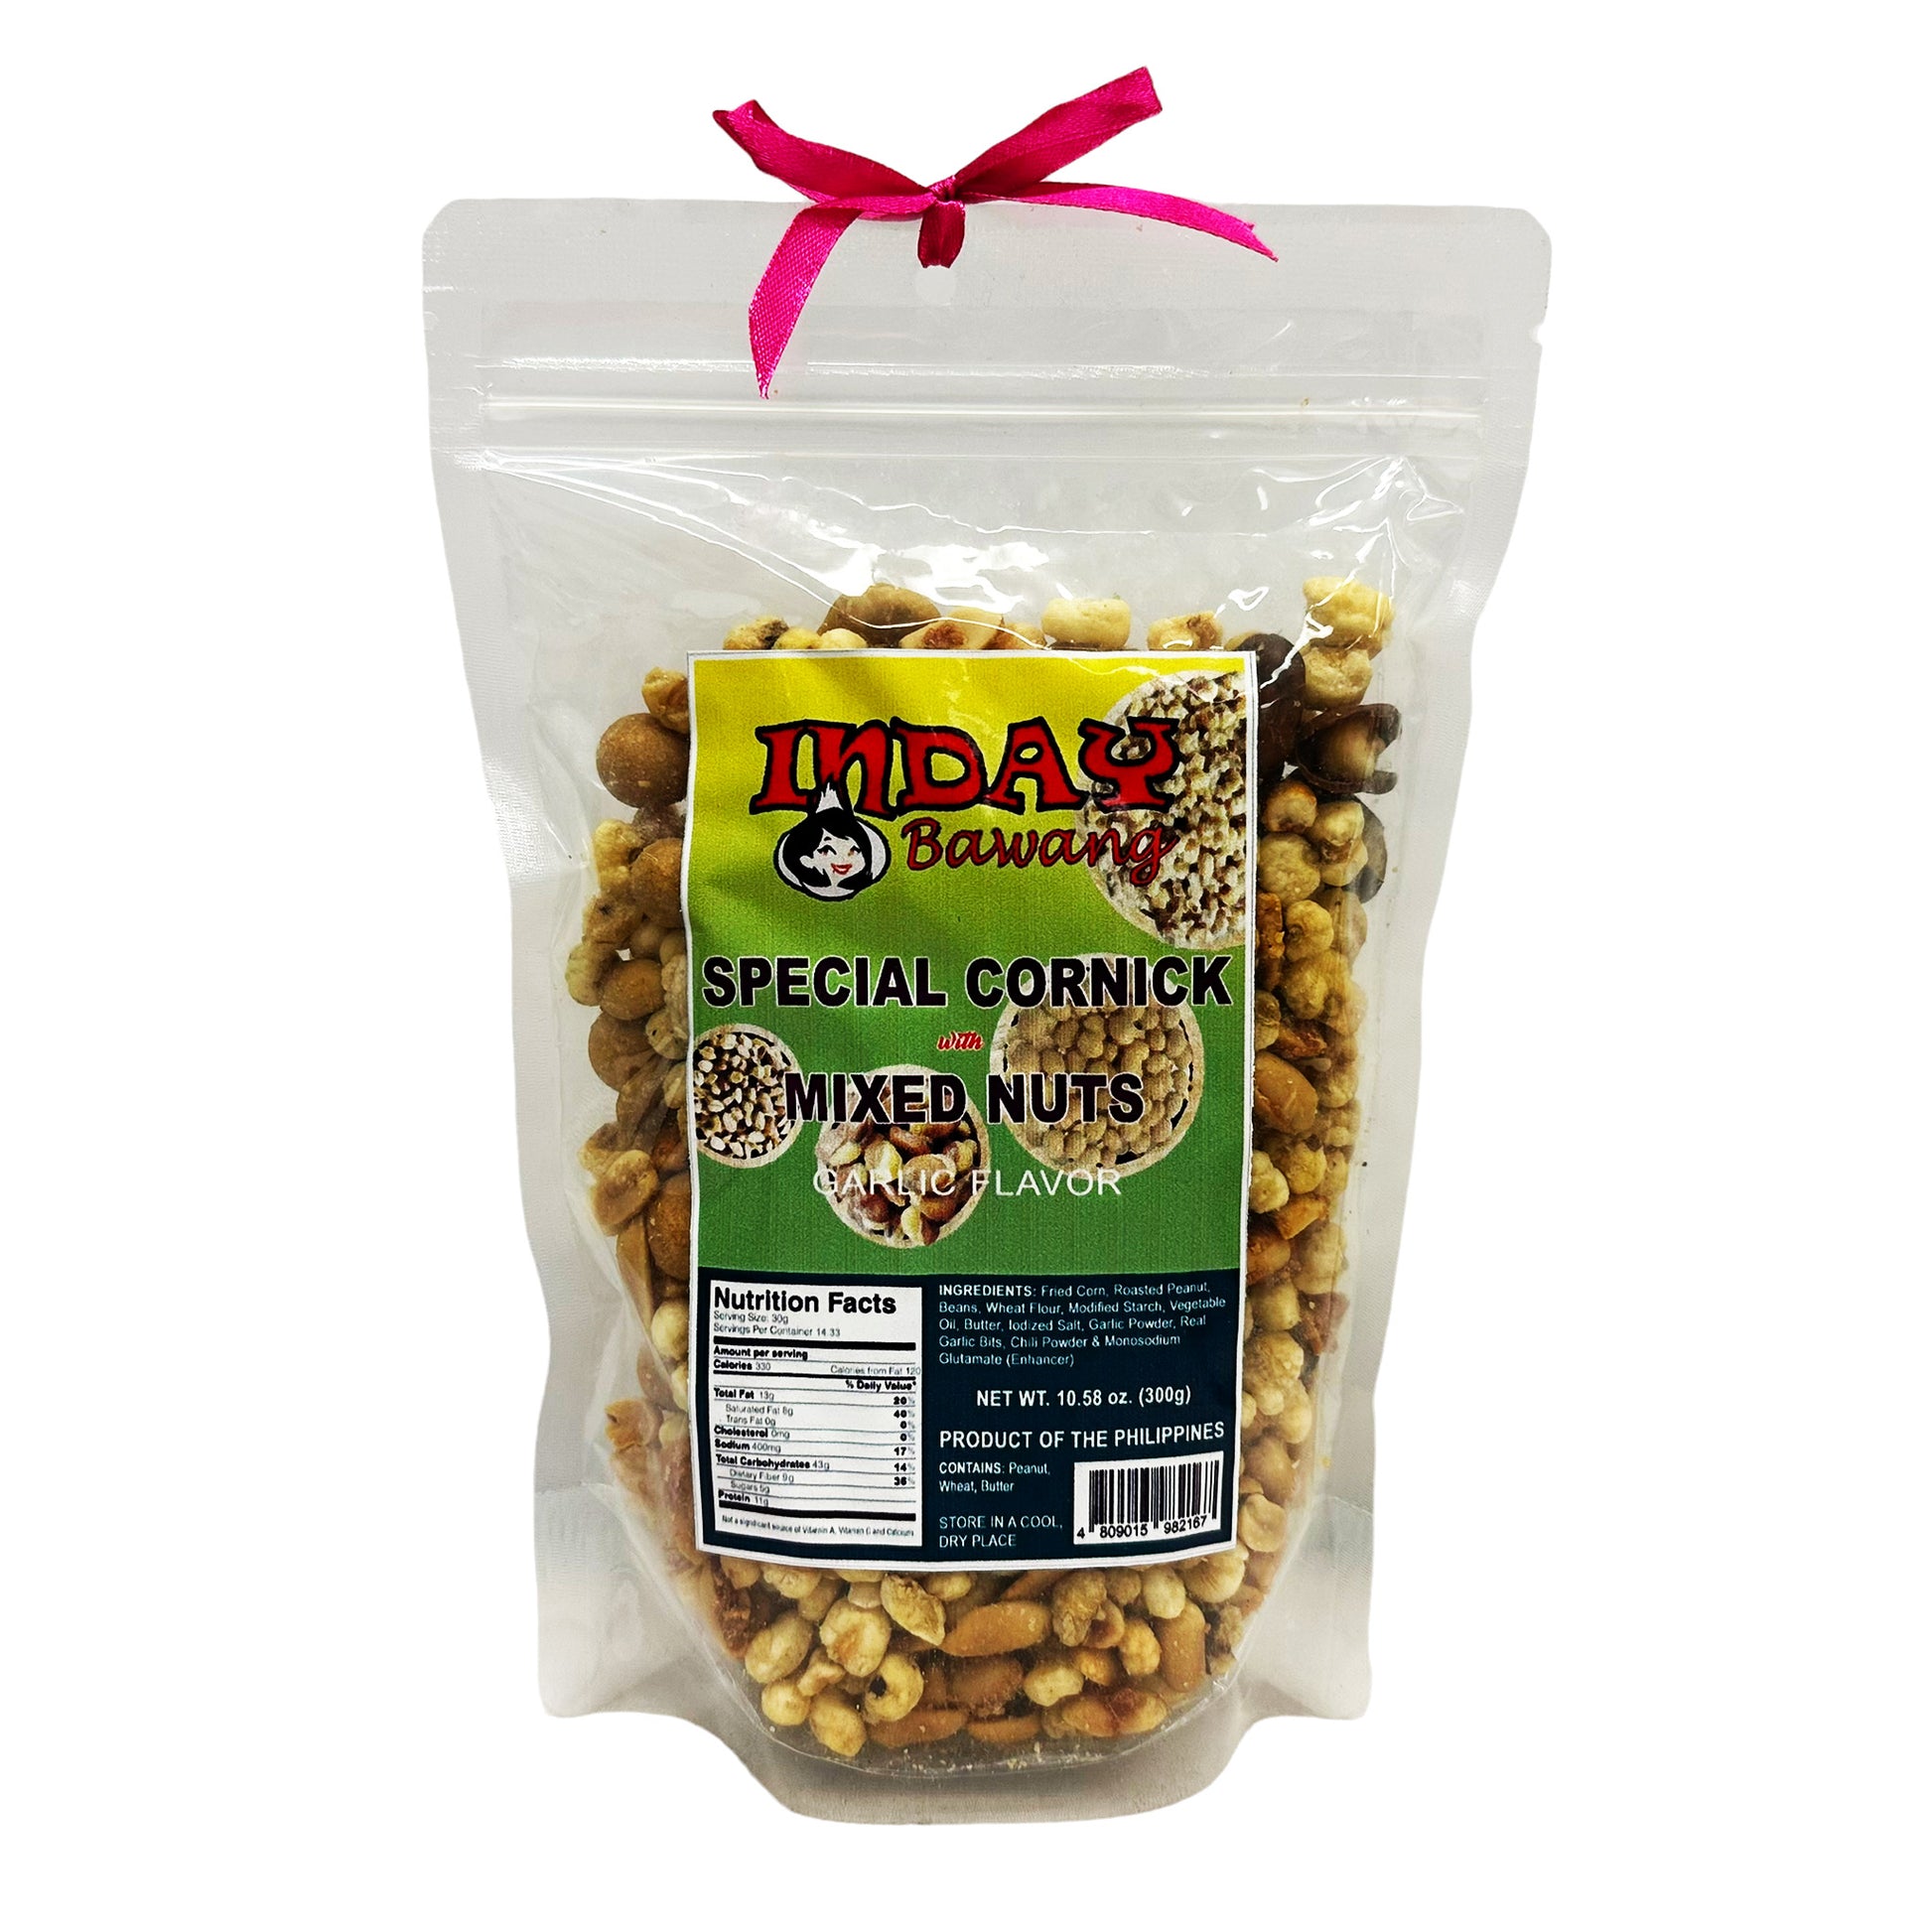 Front graphic image of Inday Bawang Special Cornick With Mixed Nuts - Garlic Flavor 10.58oz (300g)